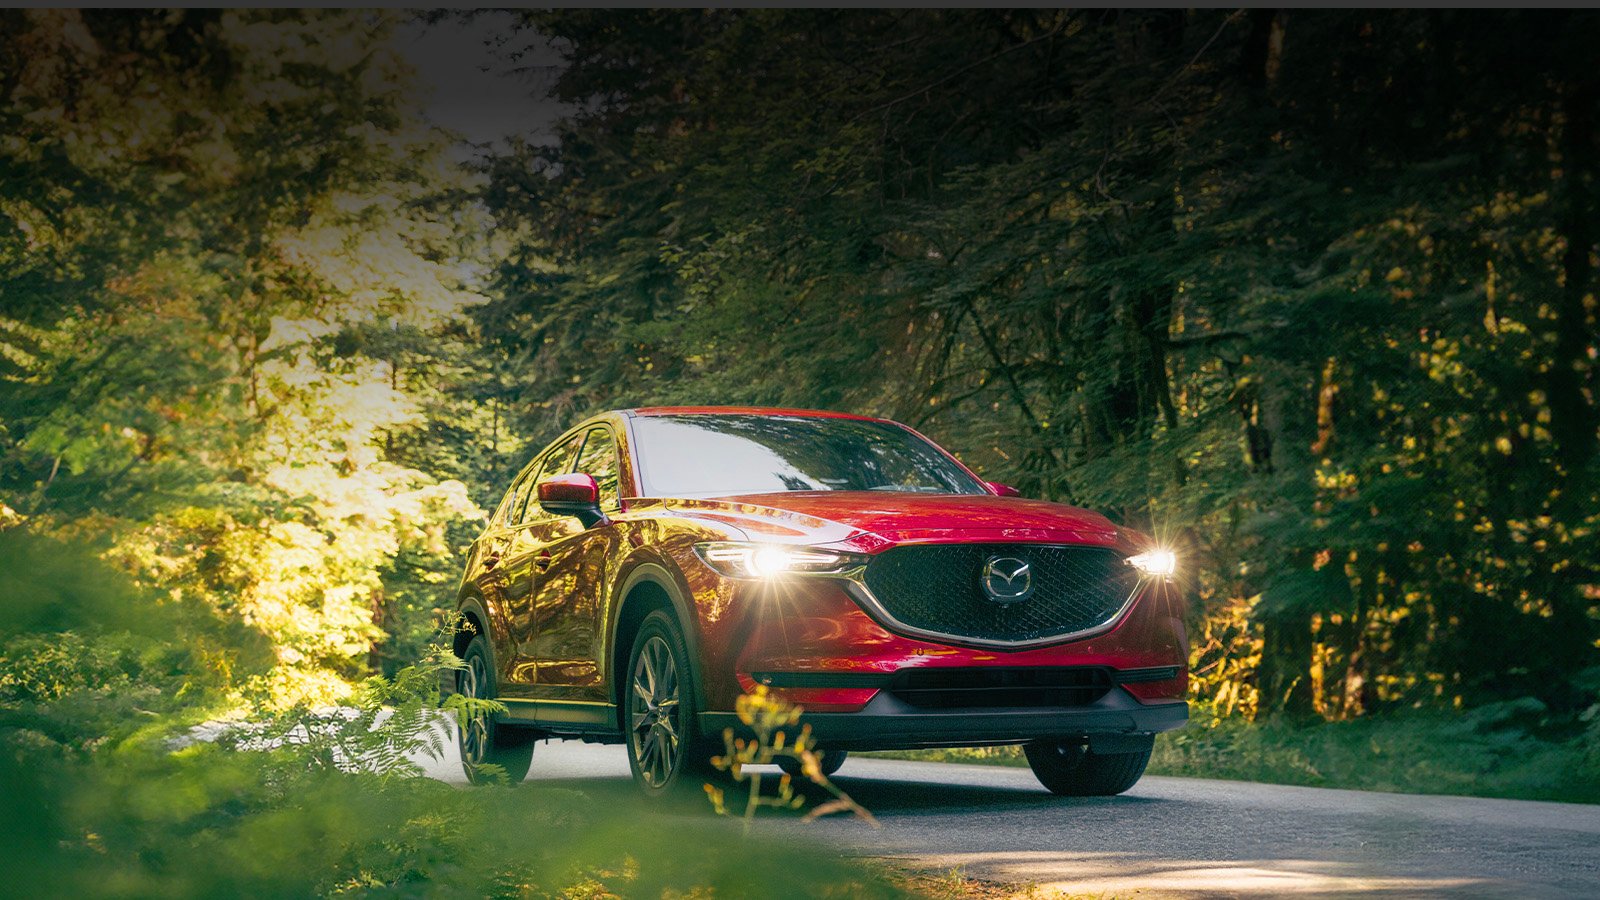 A red CX-5 driving down a road lined with trees.